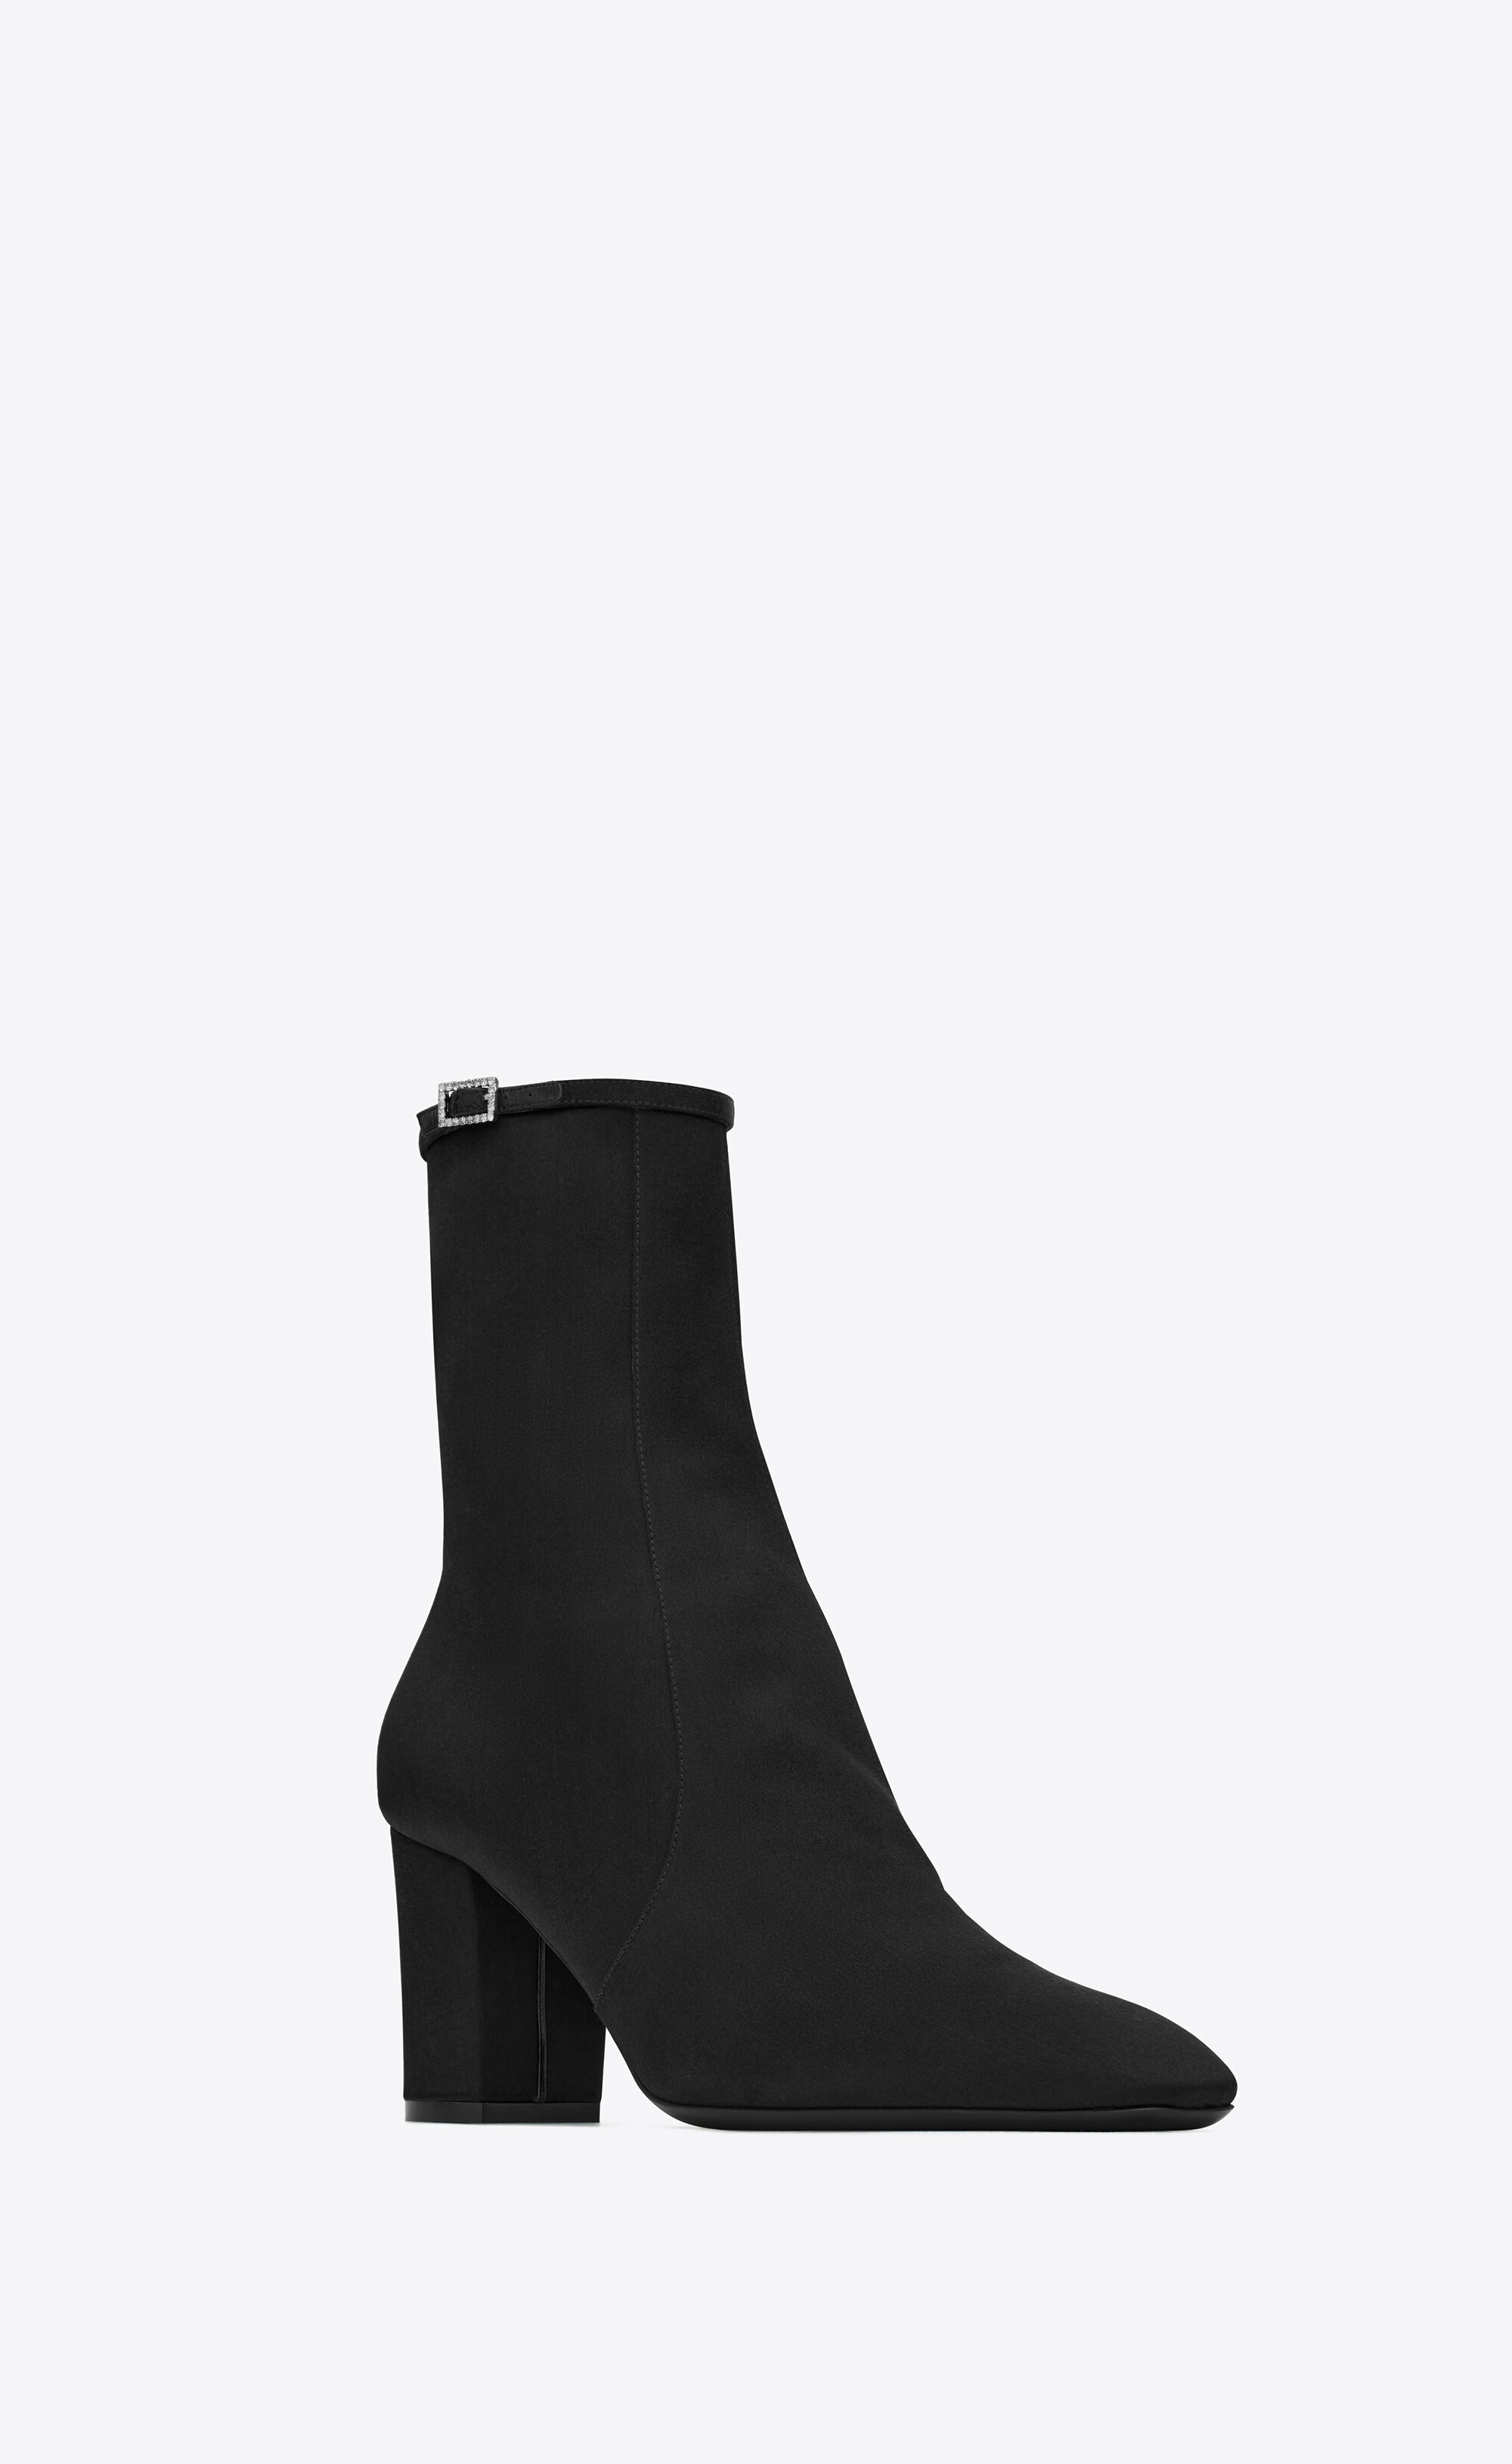 betty booties in satin crepe - 4